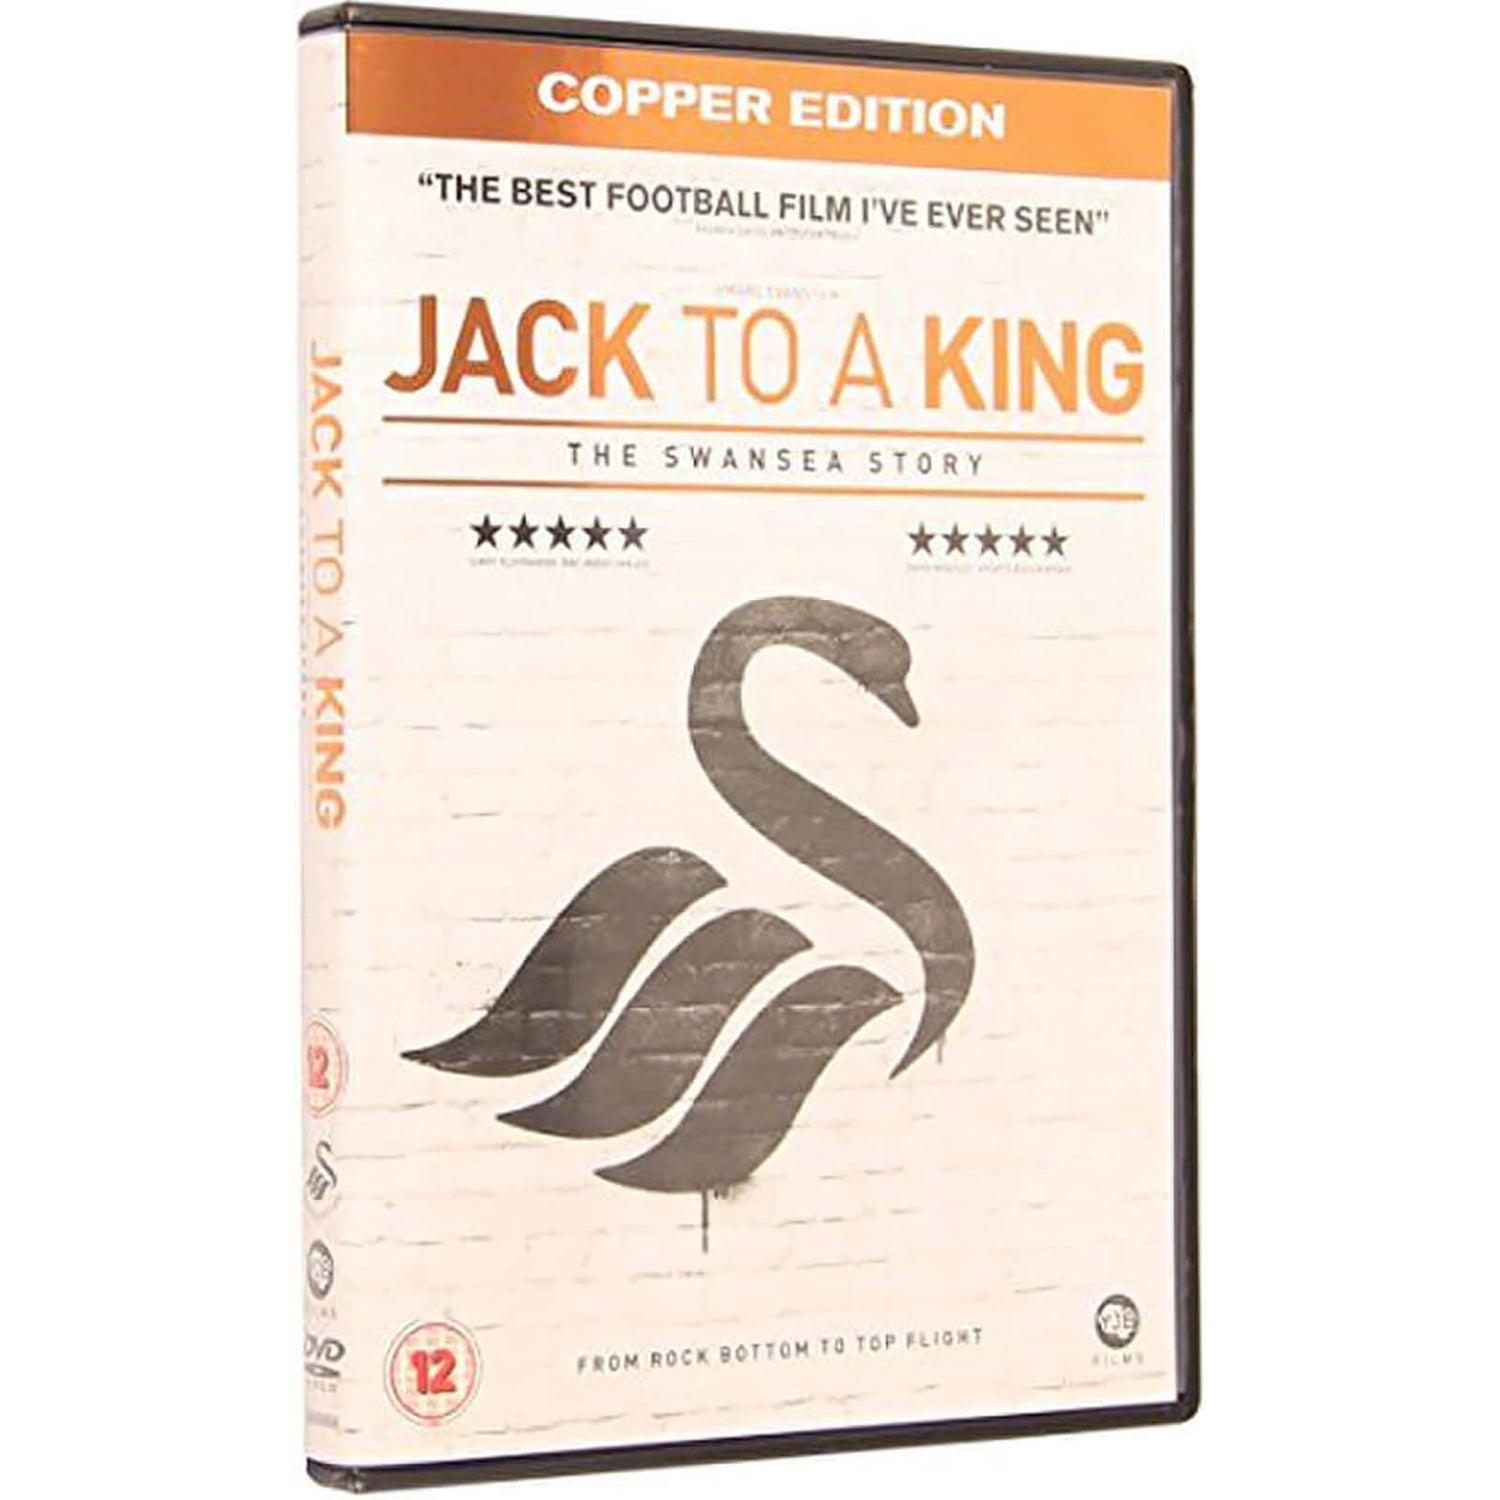 Jack to a King - Copper Edition